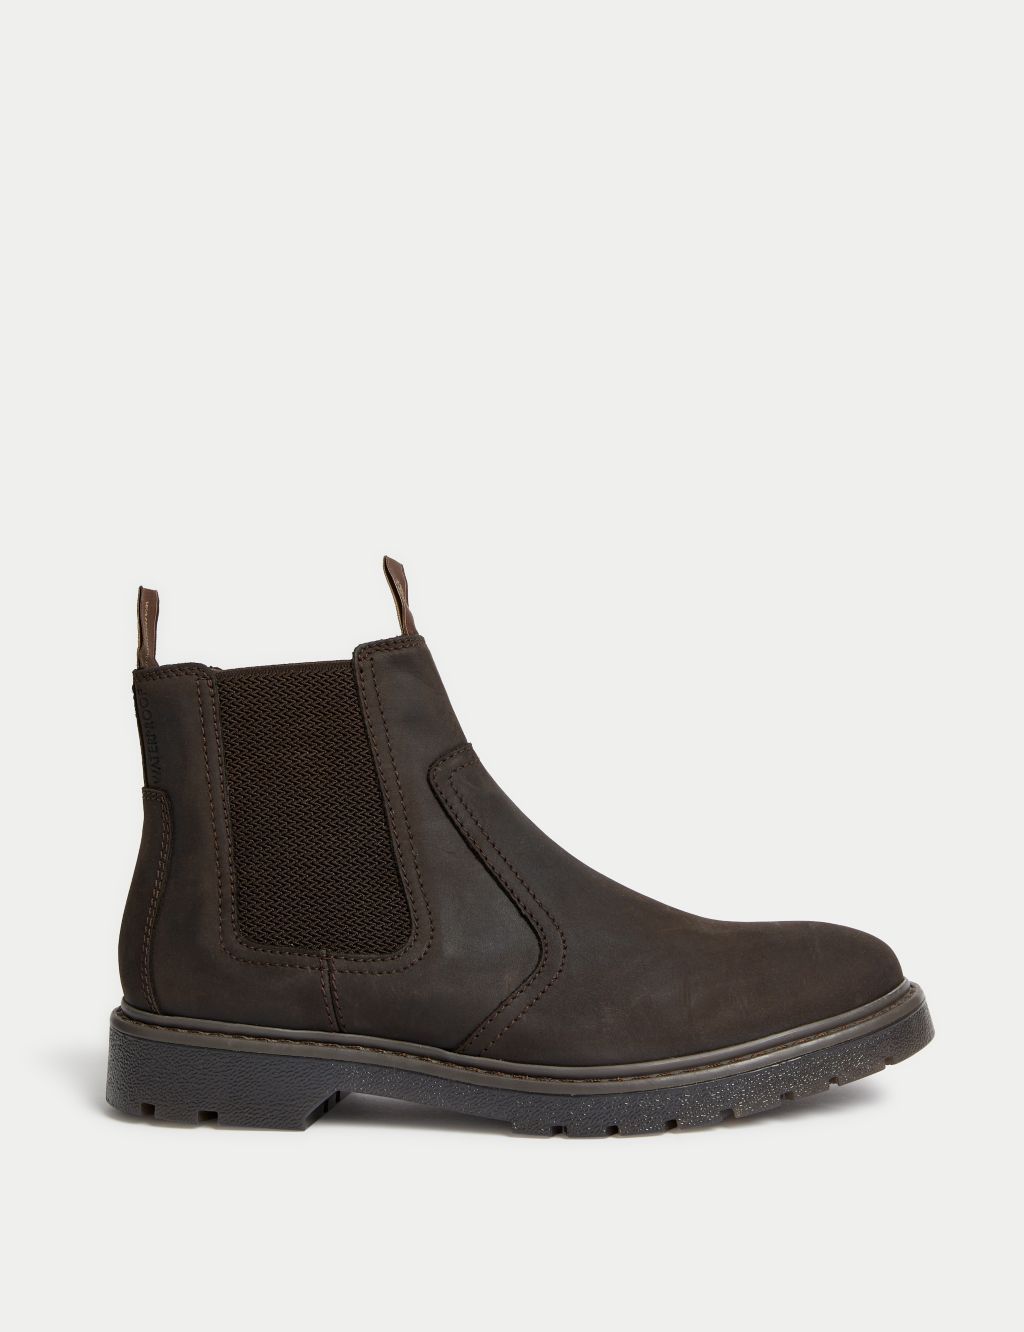 Leather Waterproof Chelsea Boots image 1